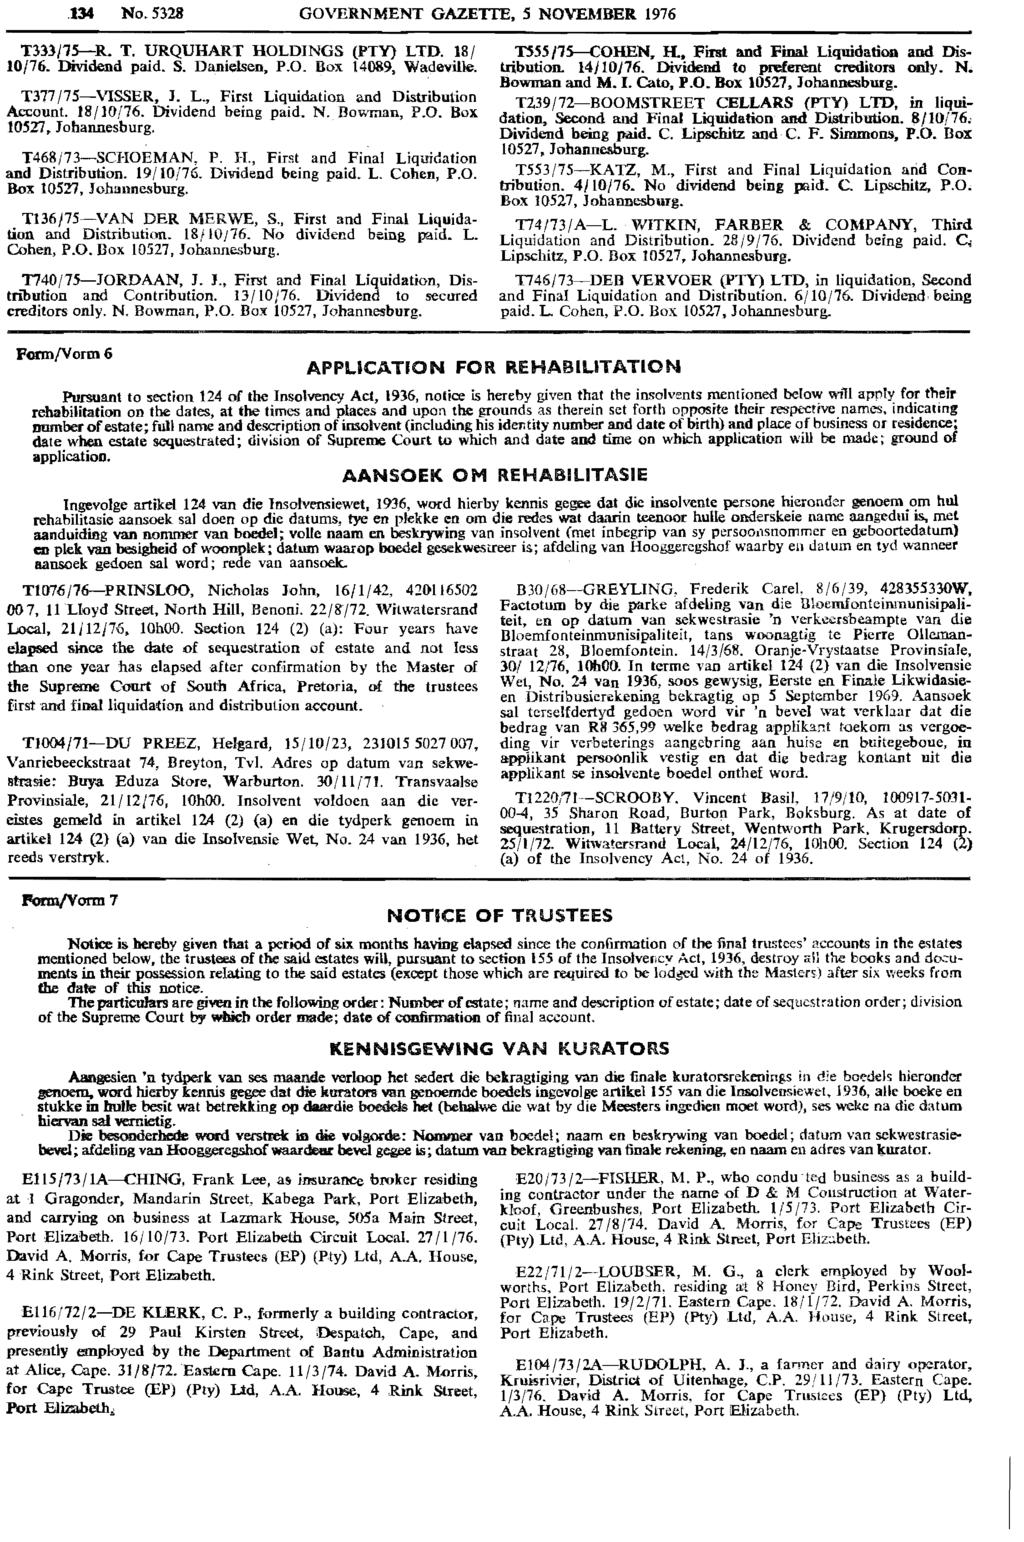 Reproduced by abinet Online in terms of Government Printer s Copyright Authority No. 10505 dated 02 February 1998.134 No. 5323 GOVERNMENT GAZETrE, 5 NOVEMBER. 1976 T333/1.5--R. T. URQUHART HOLDING (PTy) LTD.